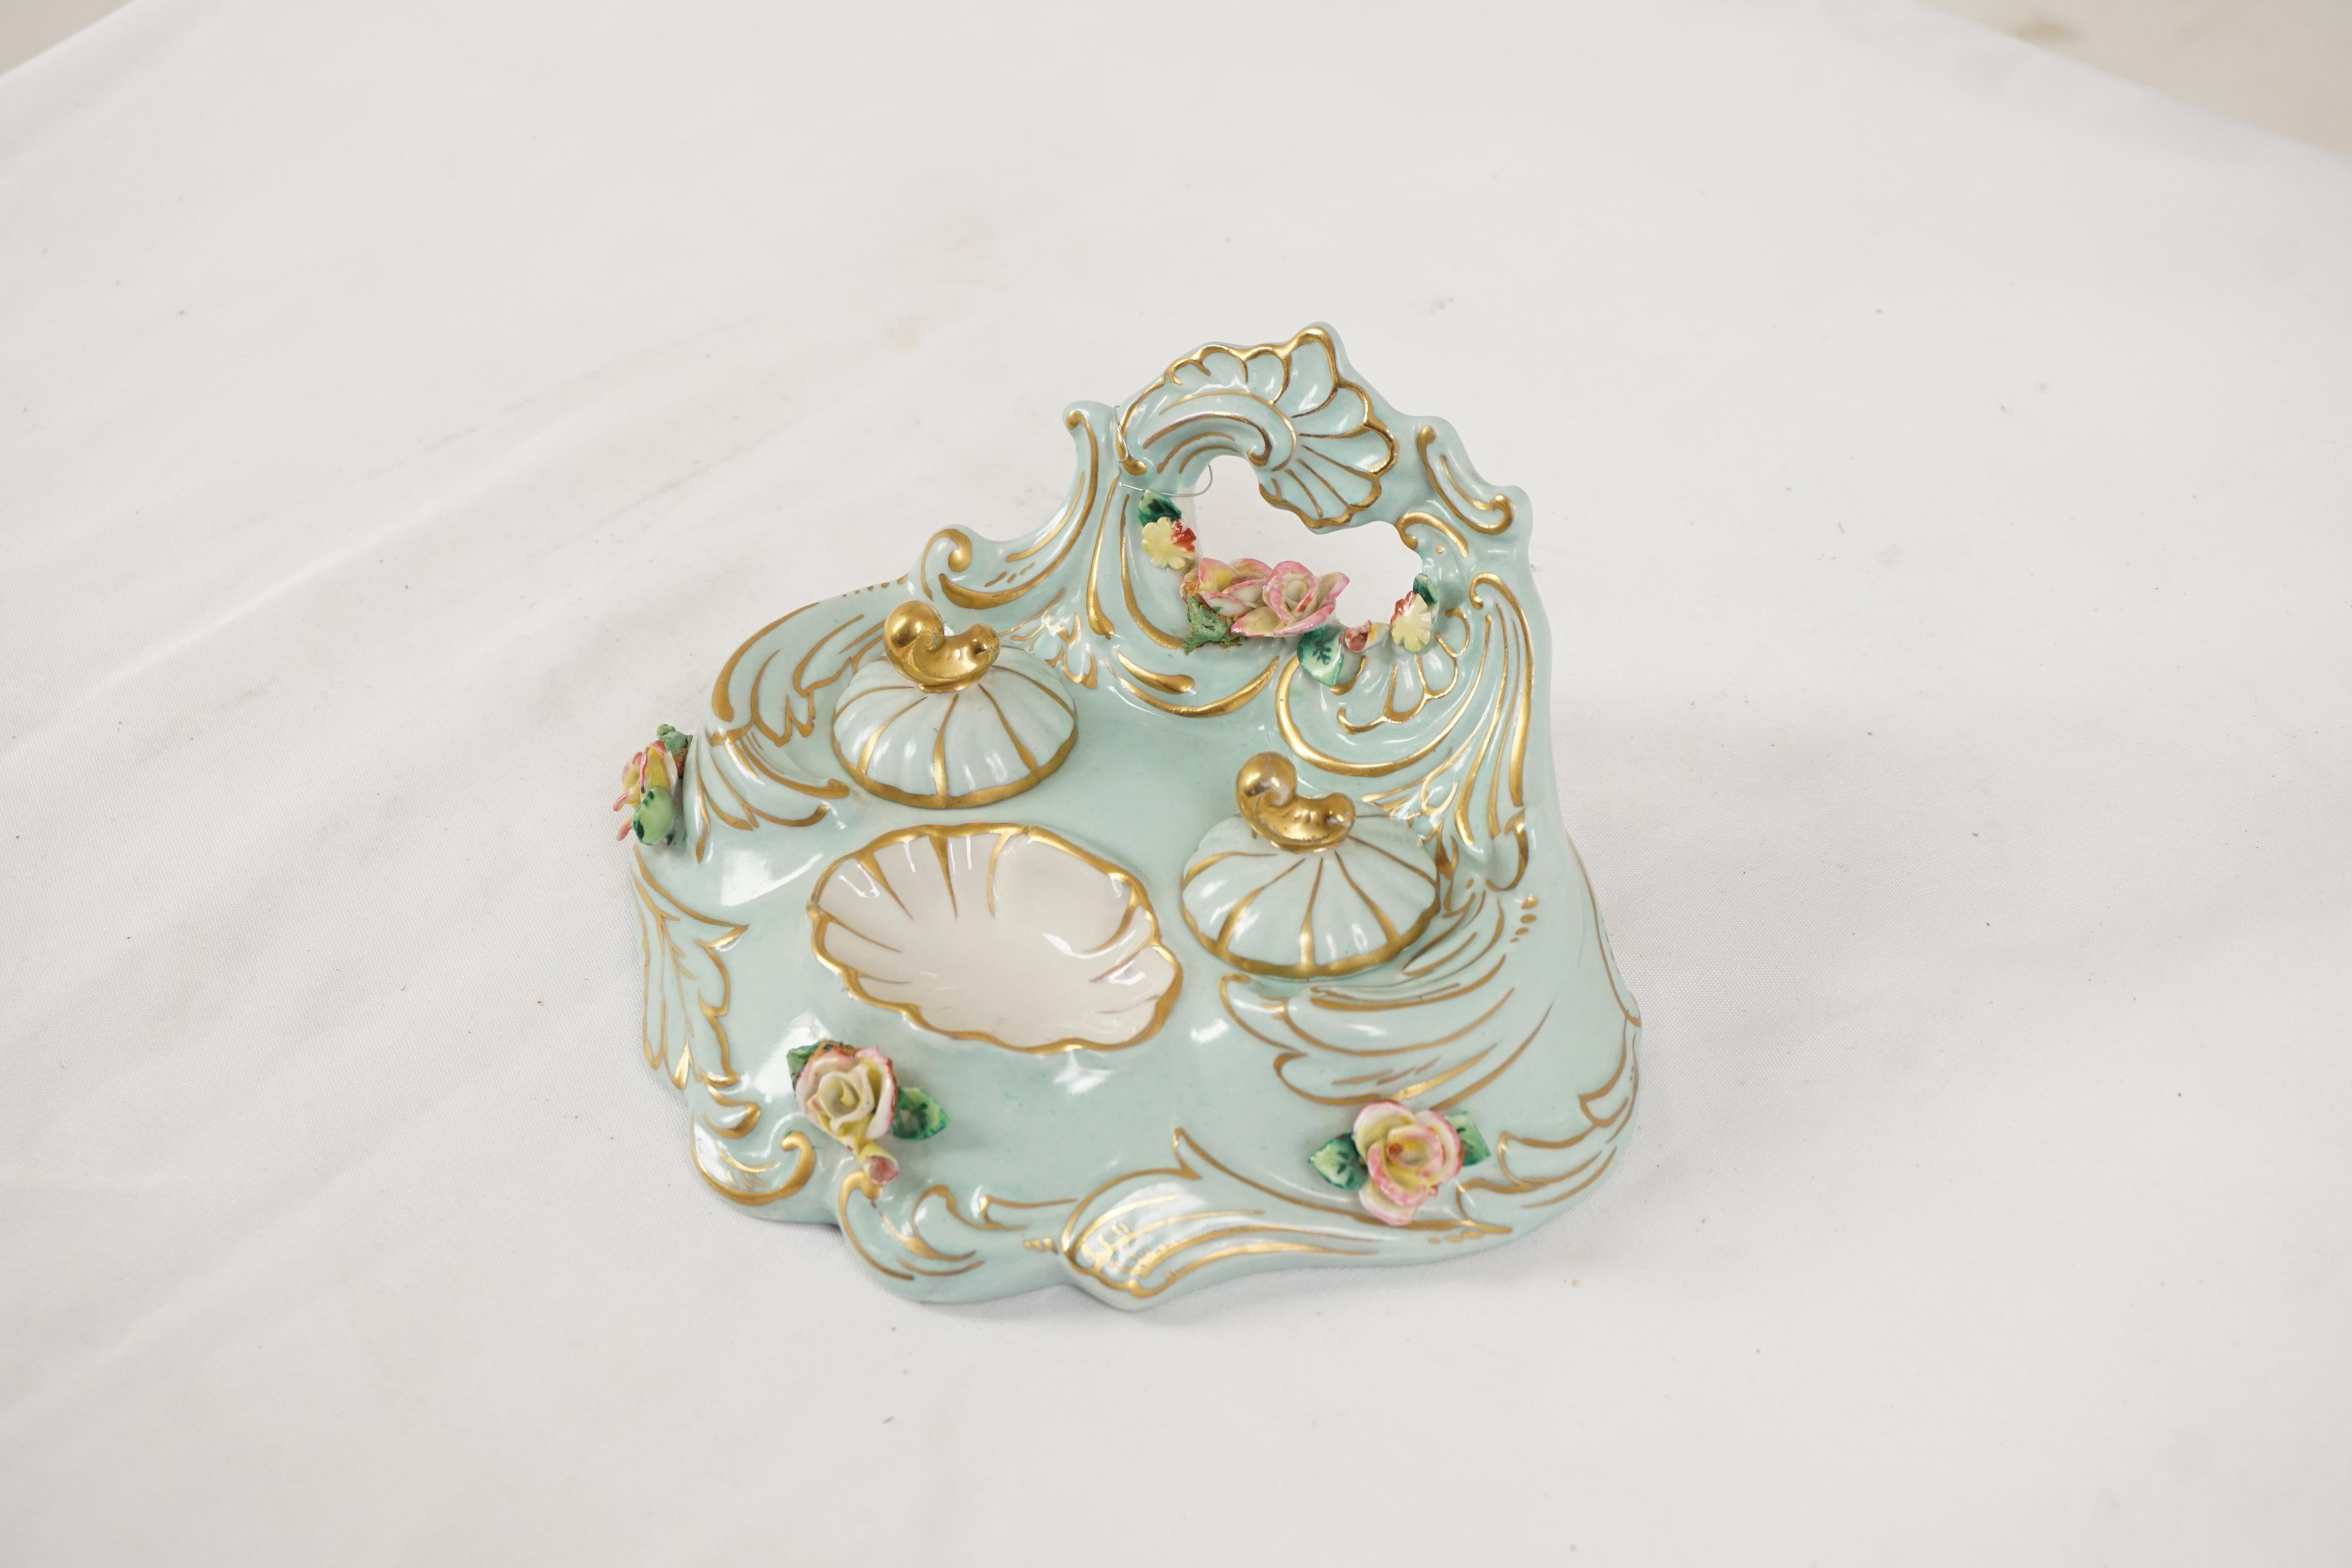 Antique double inkstand, linage blue and gilt, France 1900, H565

France 1900
Porcelain
Floral decoration to the back
Pair of porcelain inkwells with lids
Pen rest
Stamp holder to the front
Decorated flowers and leaves



Measures: 8